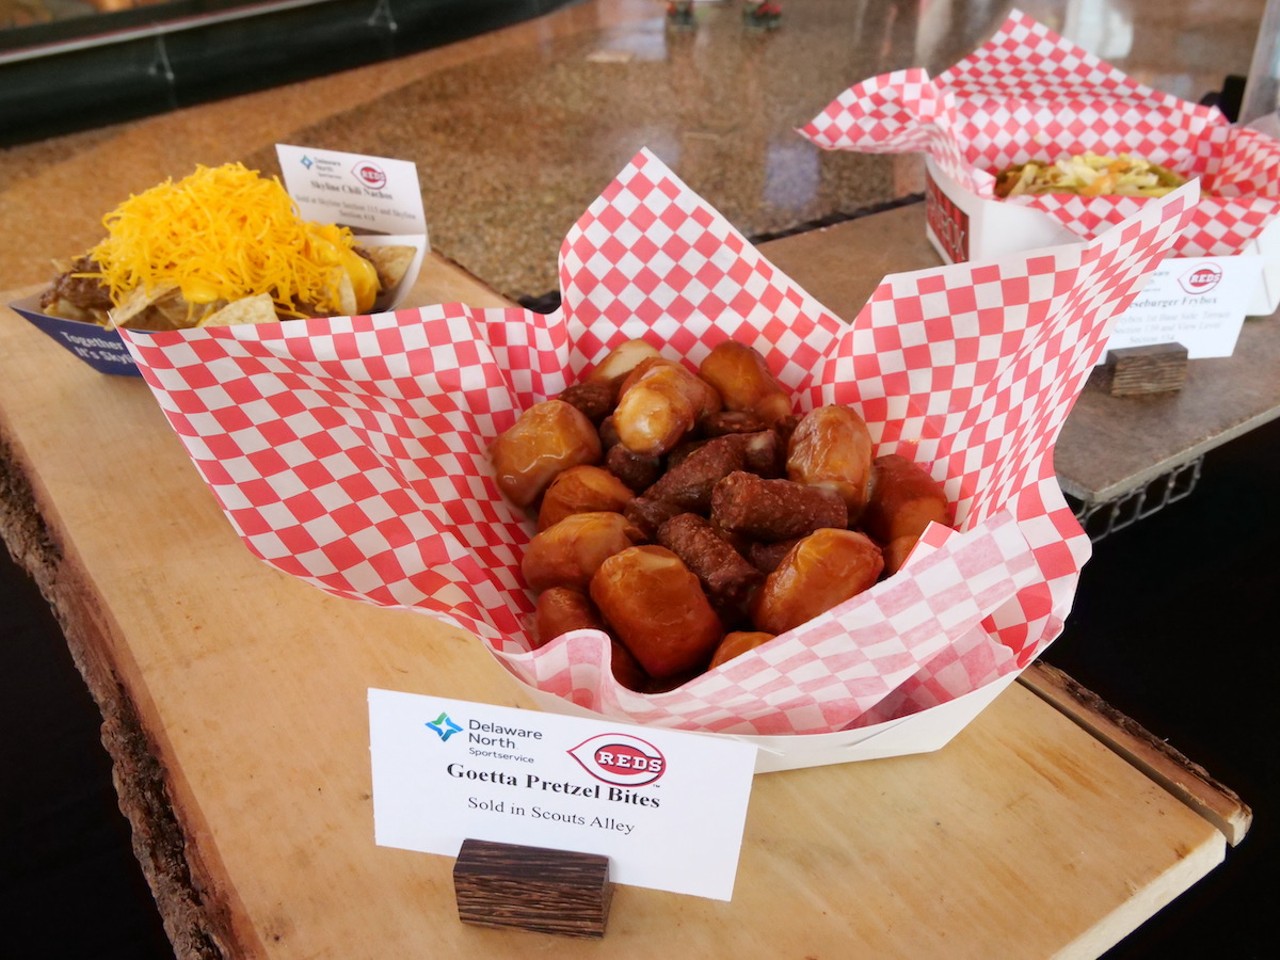 The Reds introduce new food options at Great American Ball Park on March 23, 2023, ahead of the Cincinnati Reds' 2023 season. Goetta pretzel bites, Skyline Chili nachos and a cheeseburger frybox are on the menu.